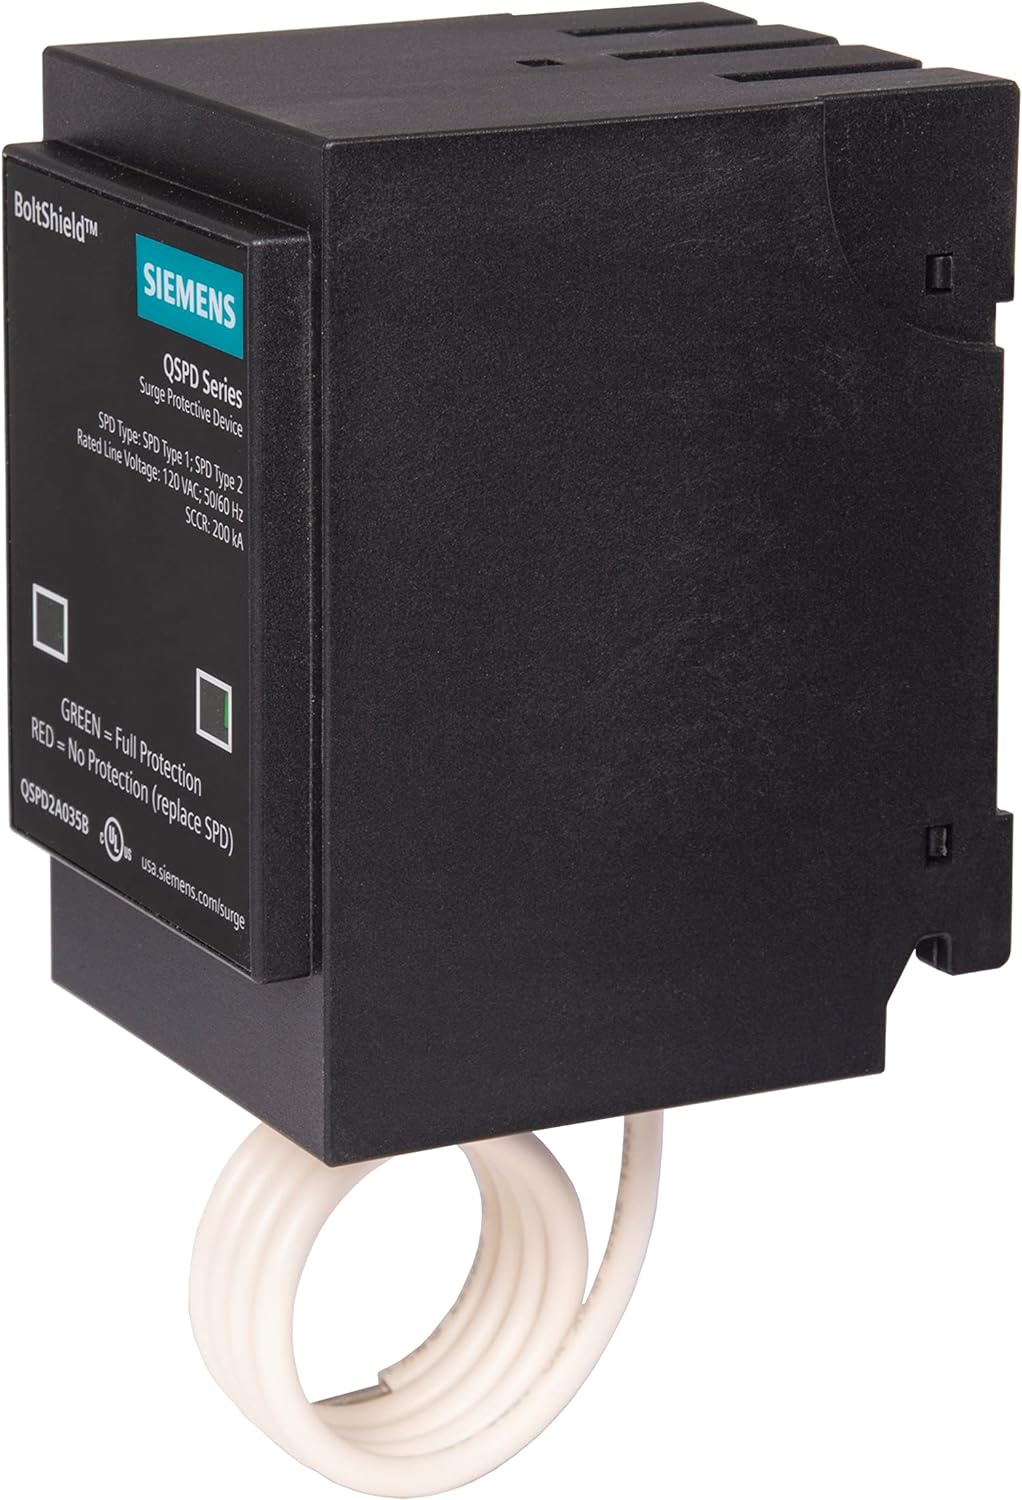 Siemens QSPD2A035B 120/240V 1-Phase 3-Wire Surge Protector Device